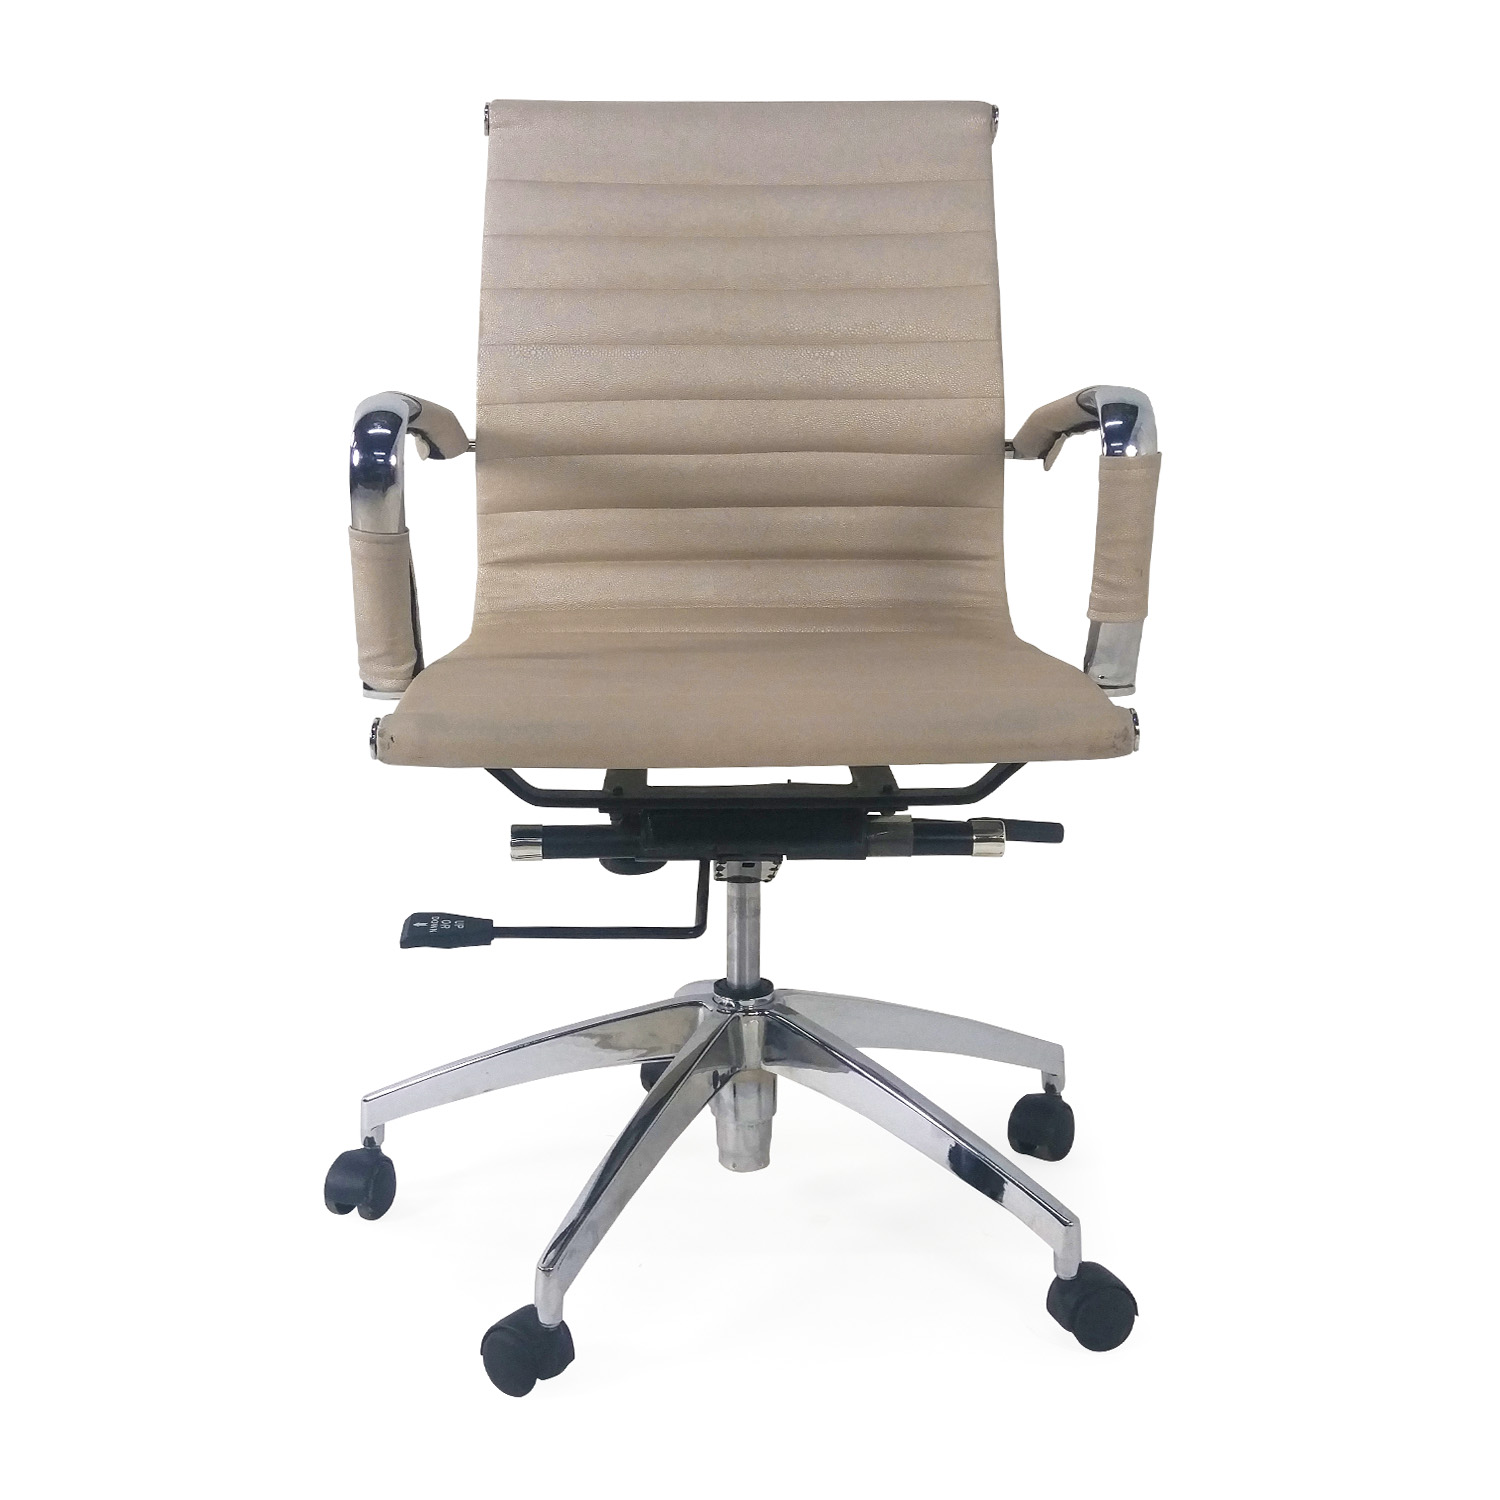 Eames Style Rolling Office Chair sale